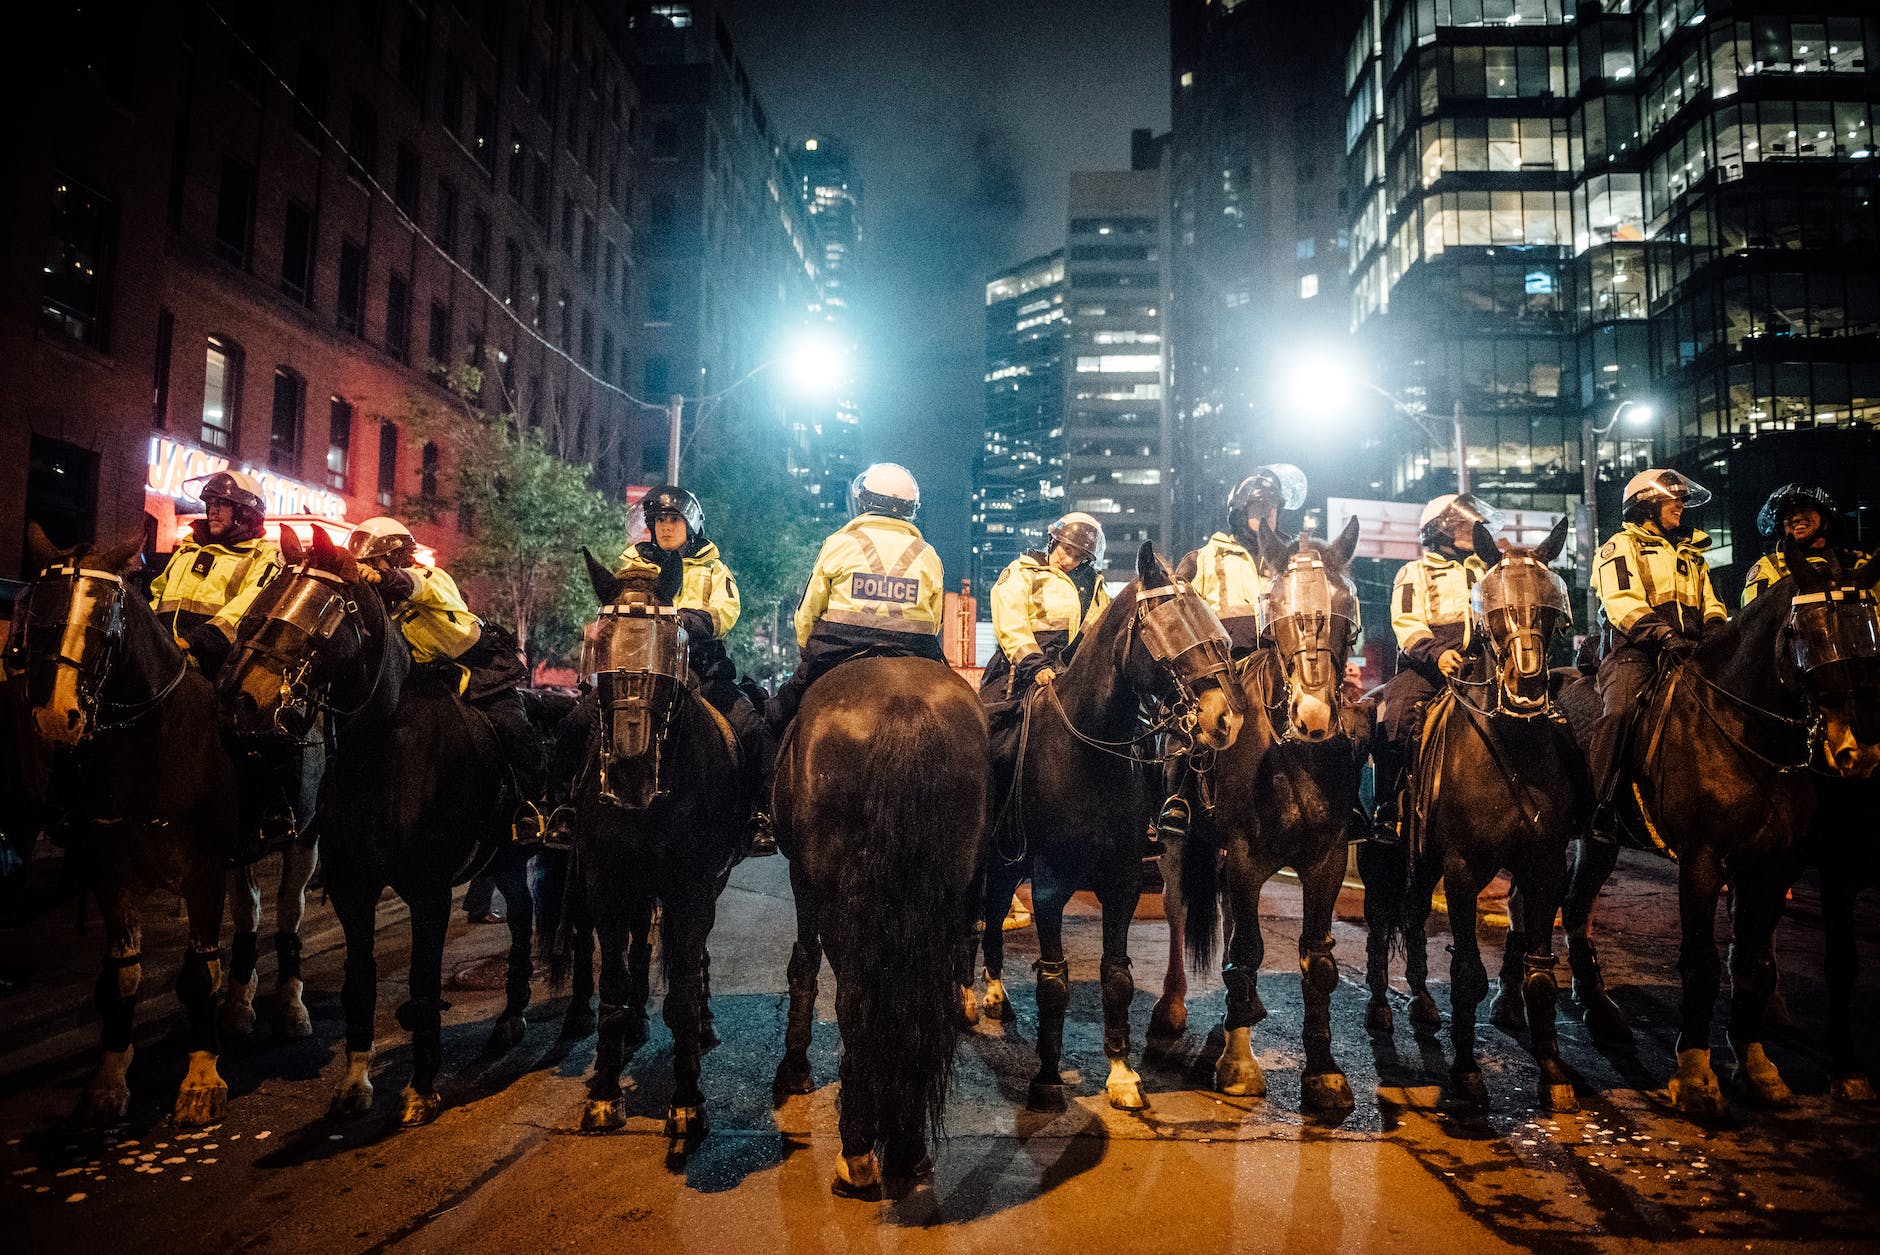 fascism is on the rise group of policemen on horse